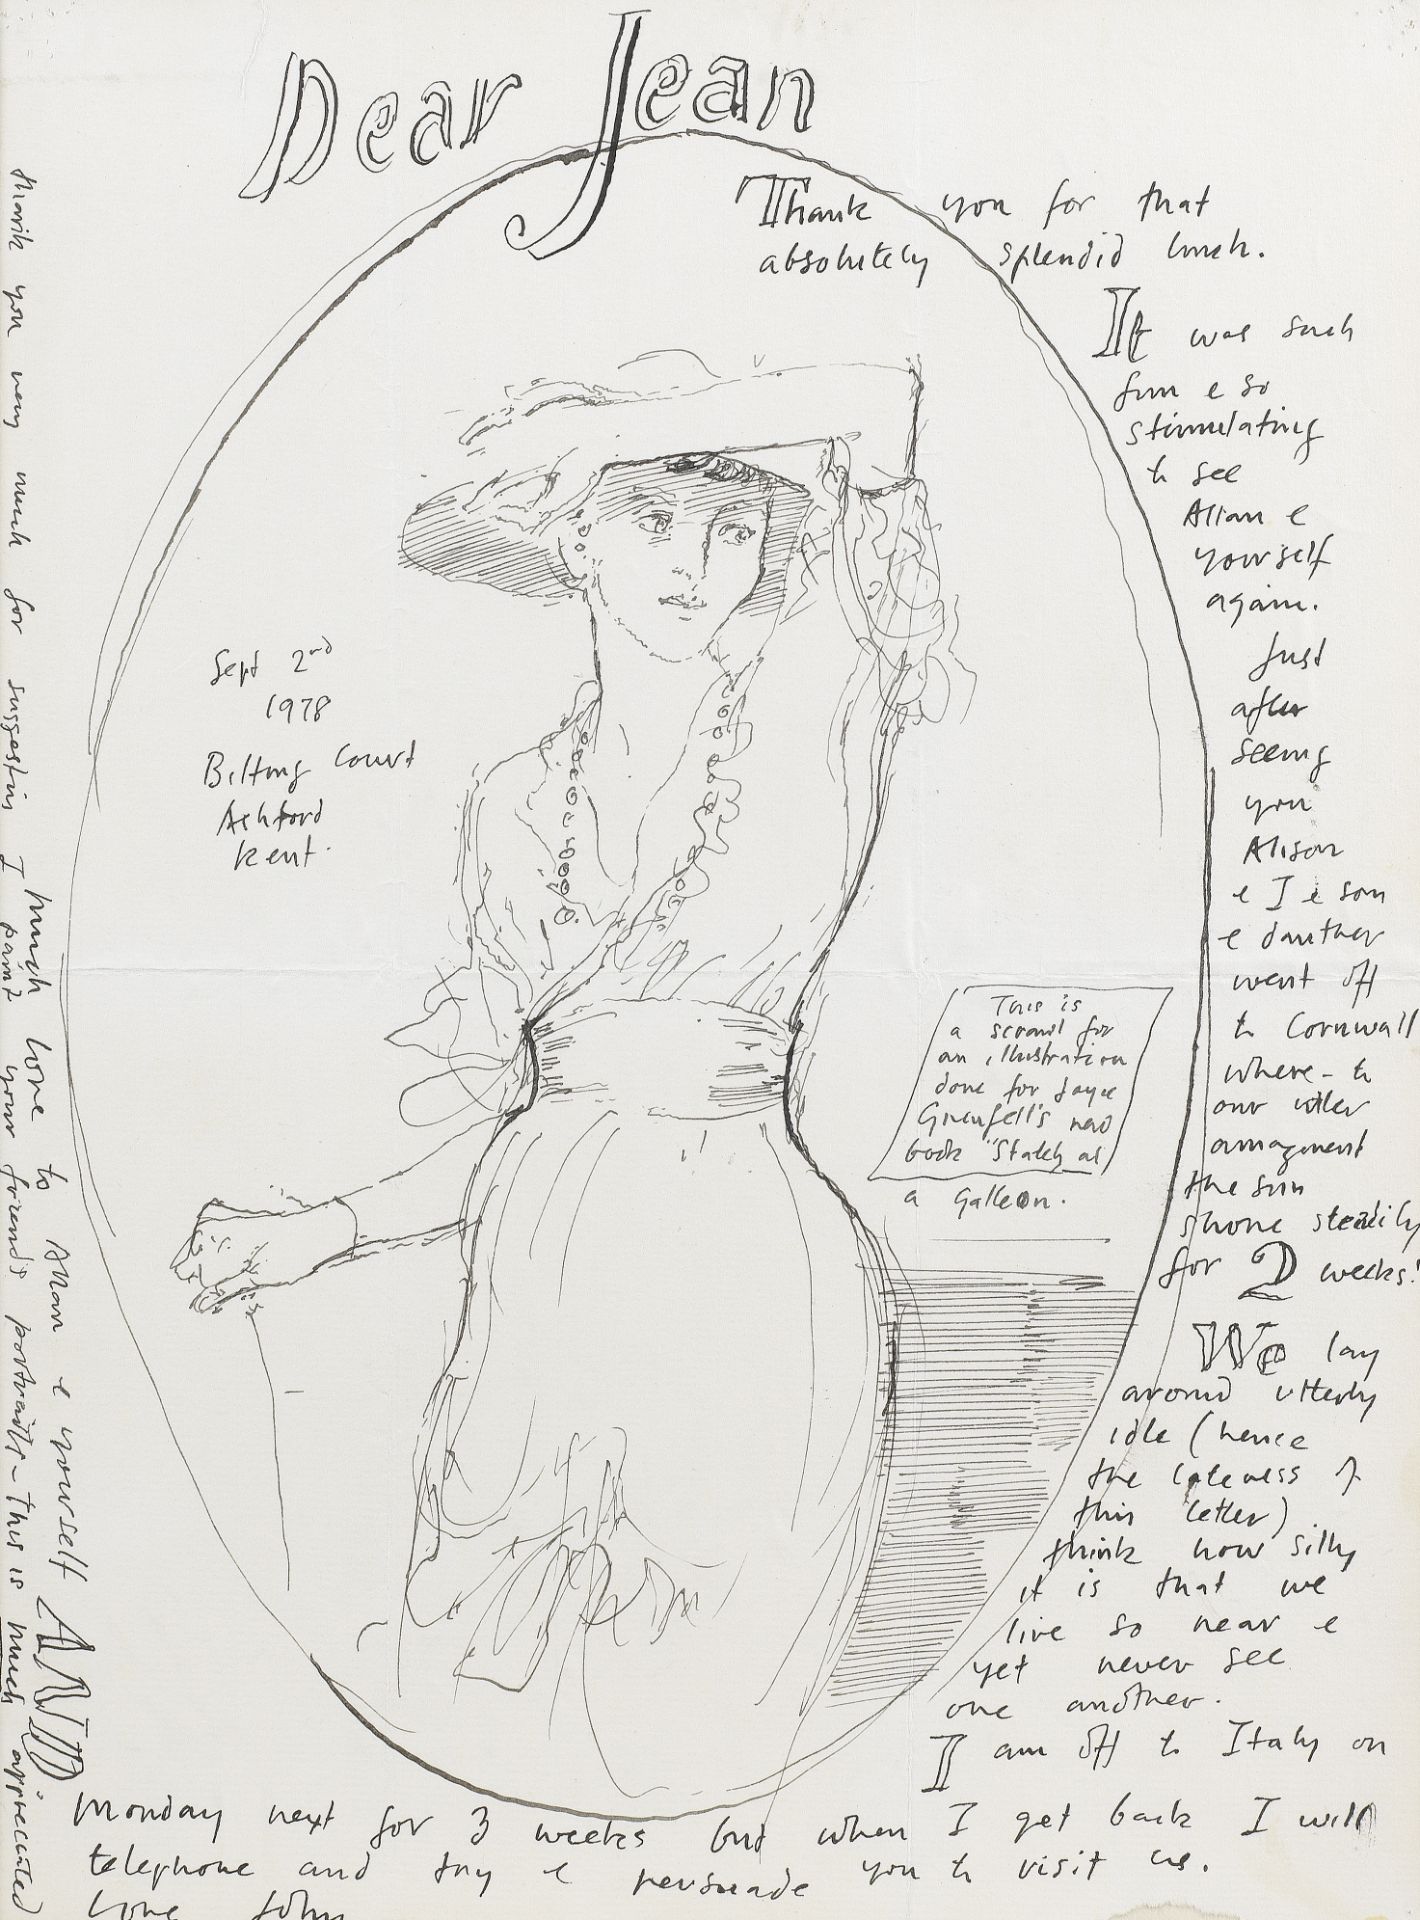 John Stanton Ward R.A. (British, 1917-2007) Sketch of Joyce Grenfell and letter to Jean Barker, B...